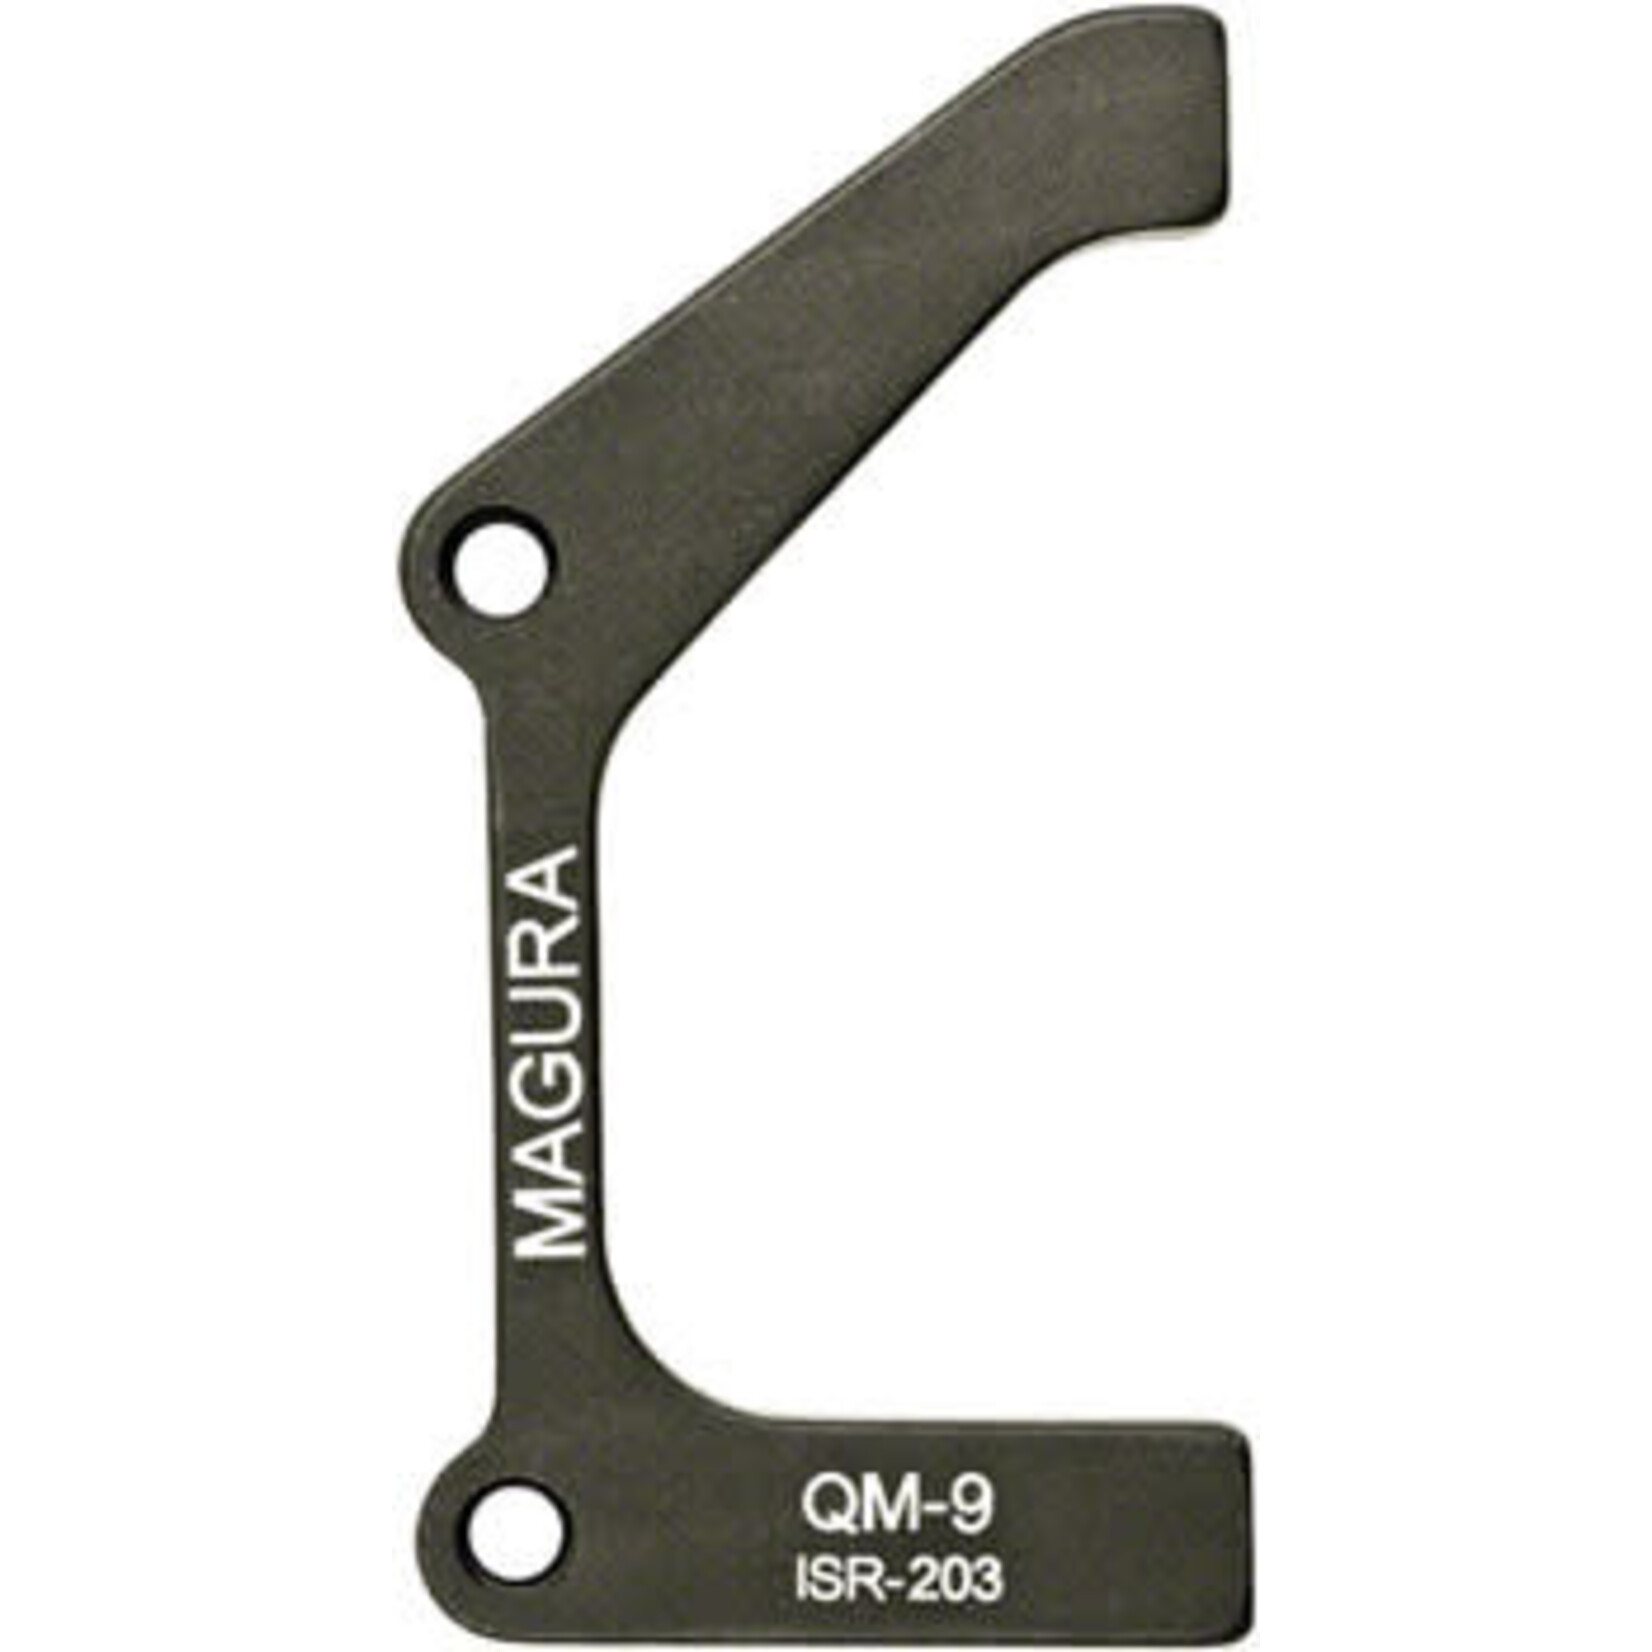 Magura QM9 bracket - 203 mm rotor with rear IS 6" mounts